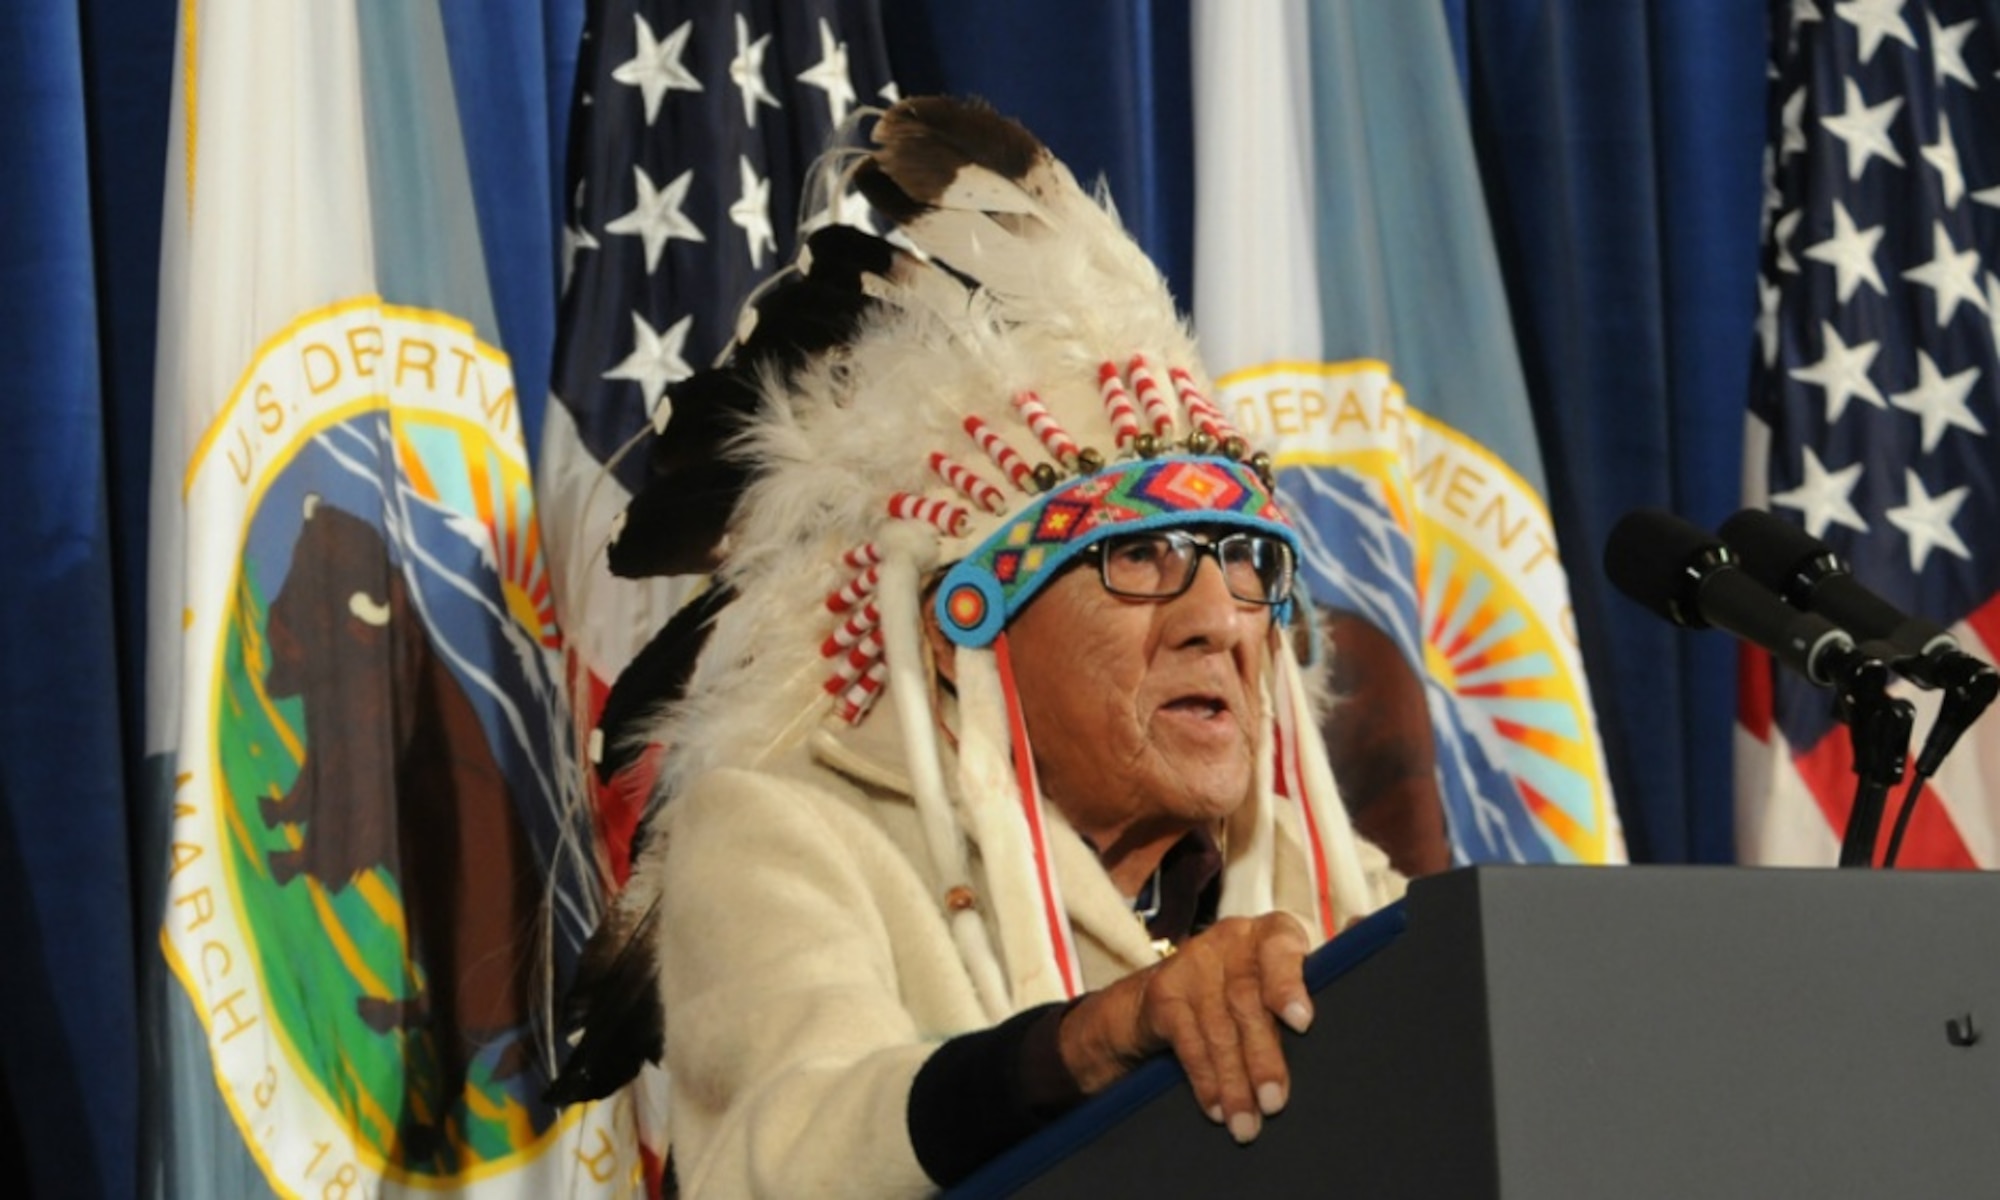 Dr. Joseph Medicine Crow gets on a stand and speaks.